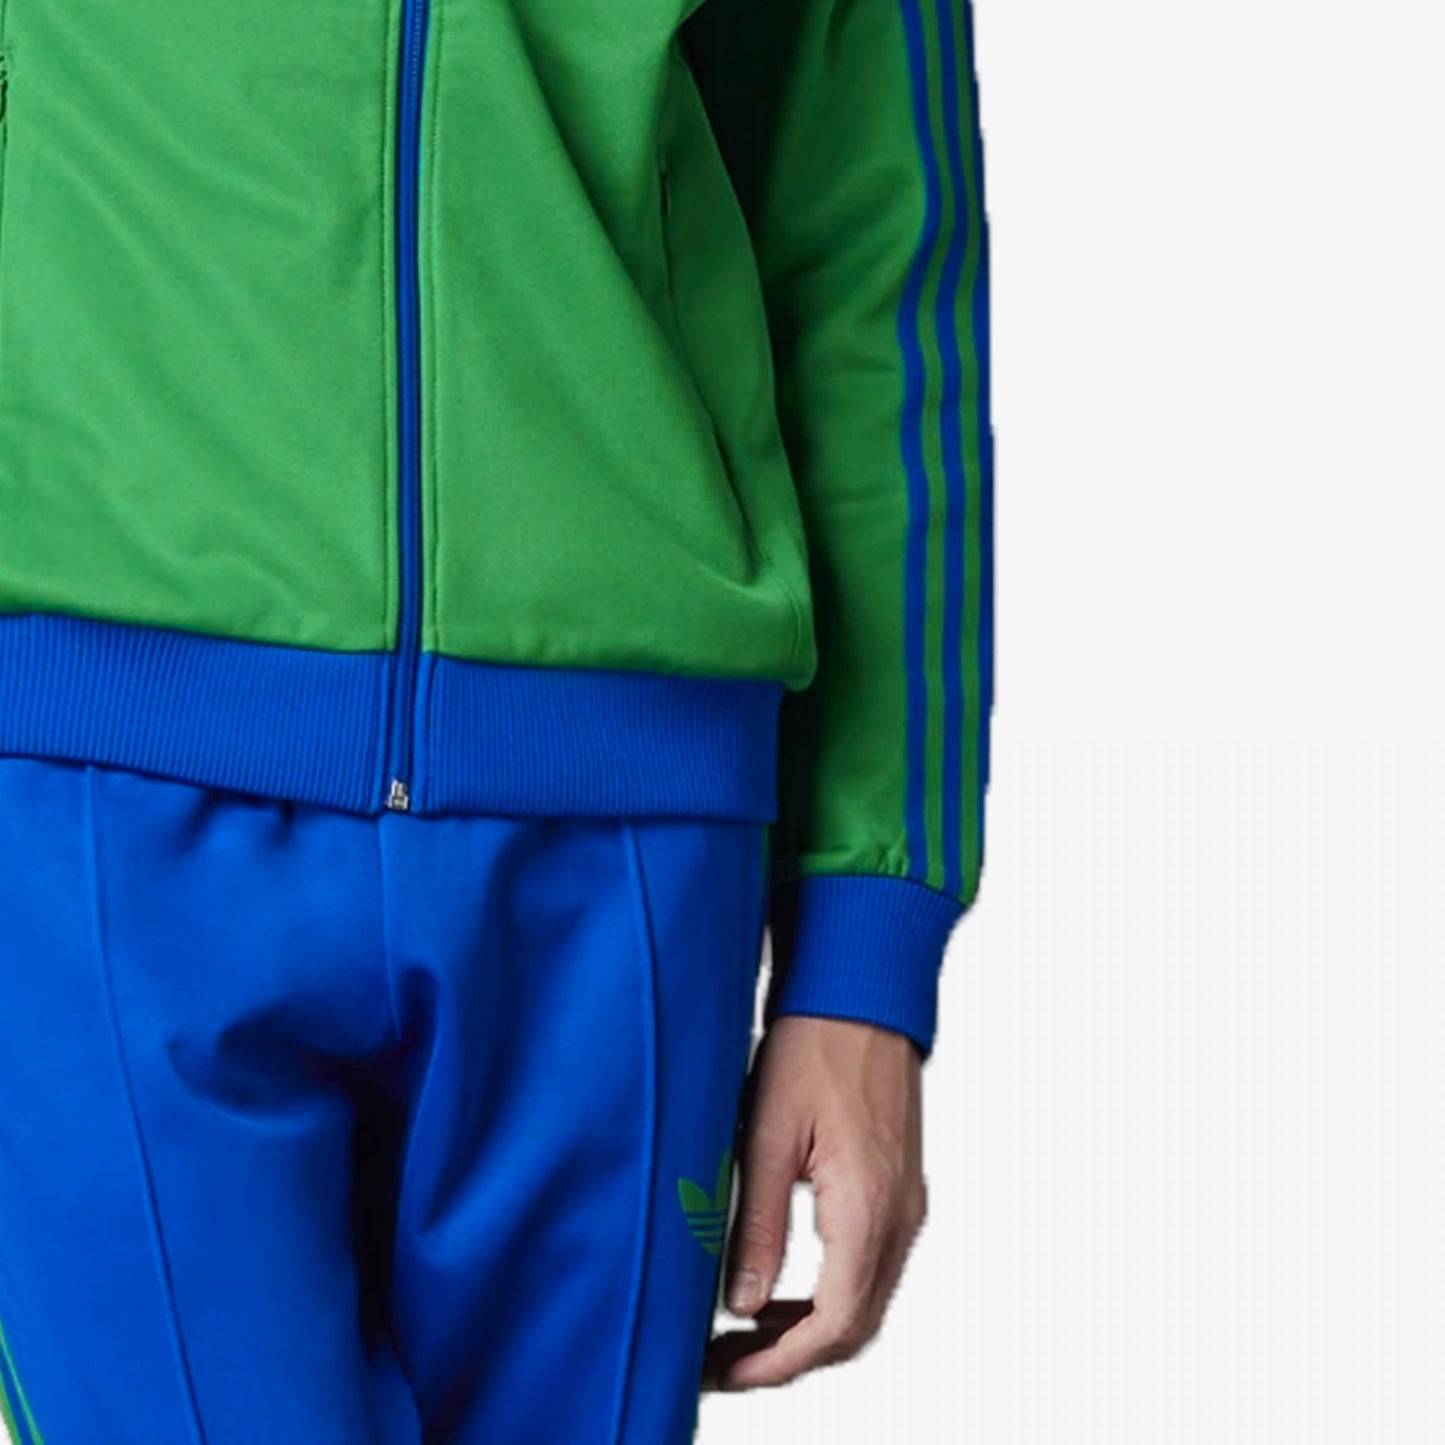 ADICOLOR HERITAGE NOW STRIPED TRACK TOP 'BLUE/GREEN'